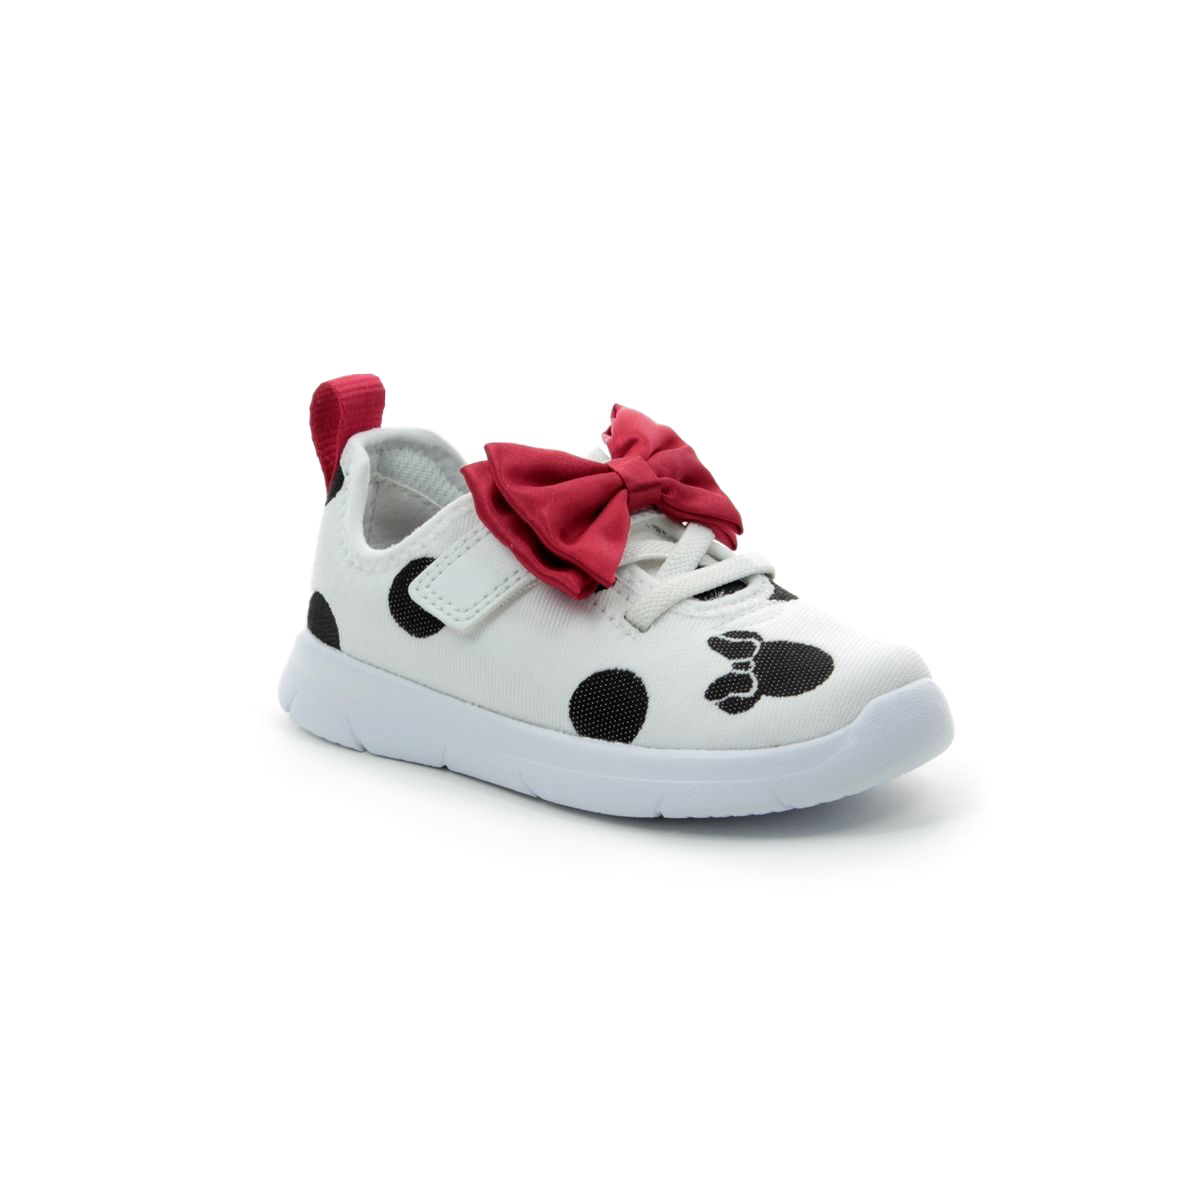 clarks trainers for kids